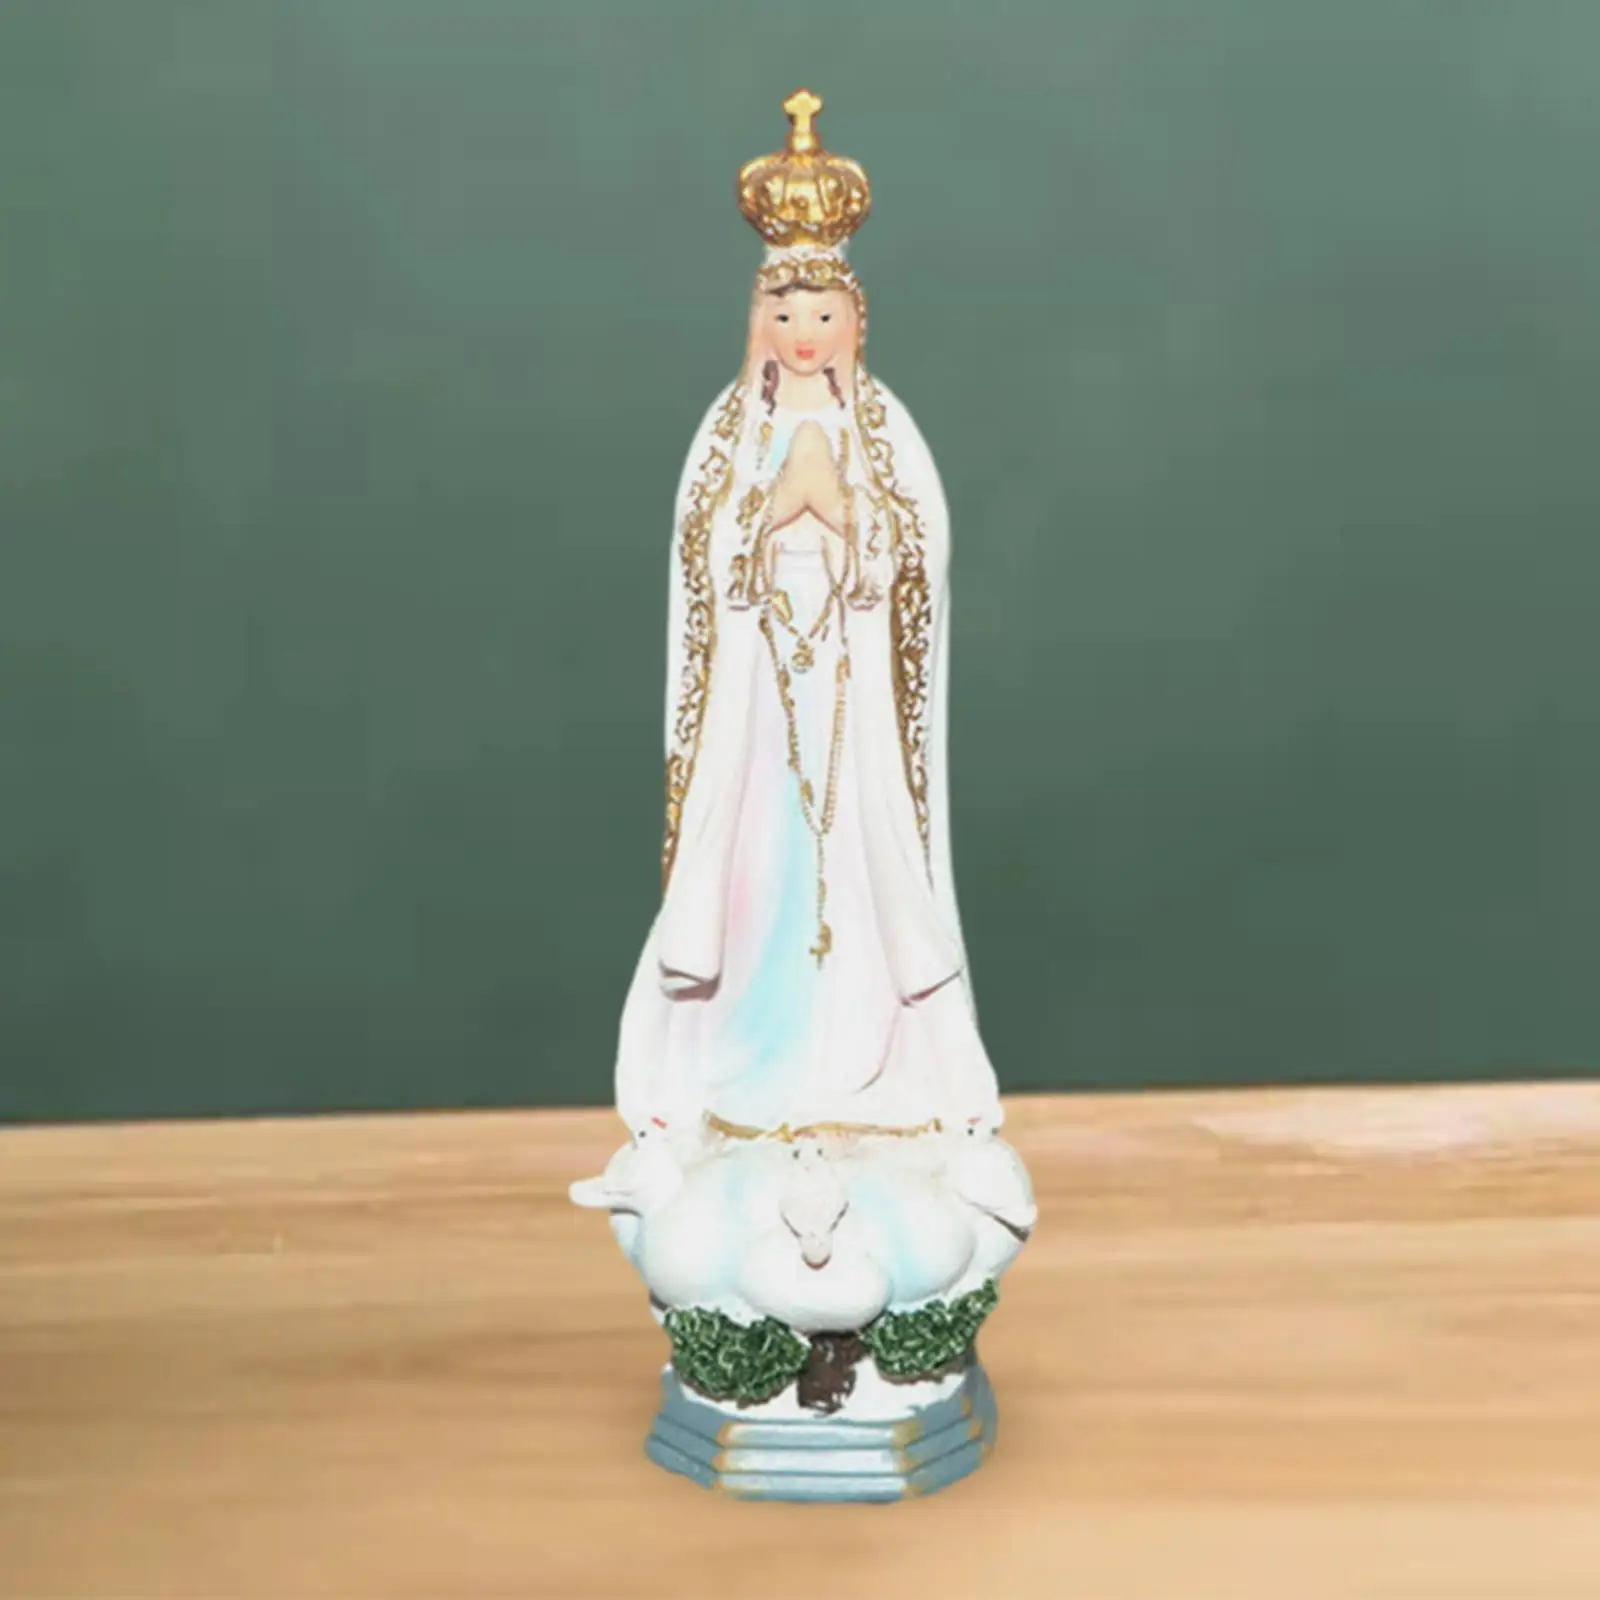 Mother Mary Figurine Holy Statue Ornament for Bedroom Tabletop Living Room